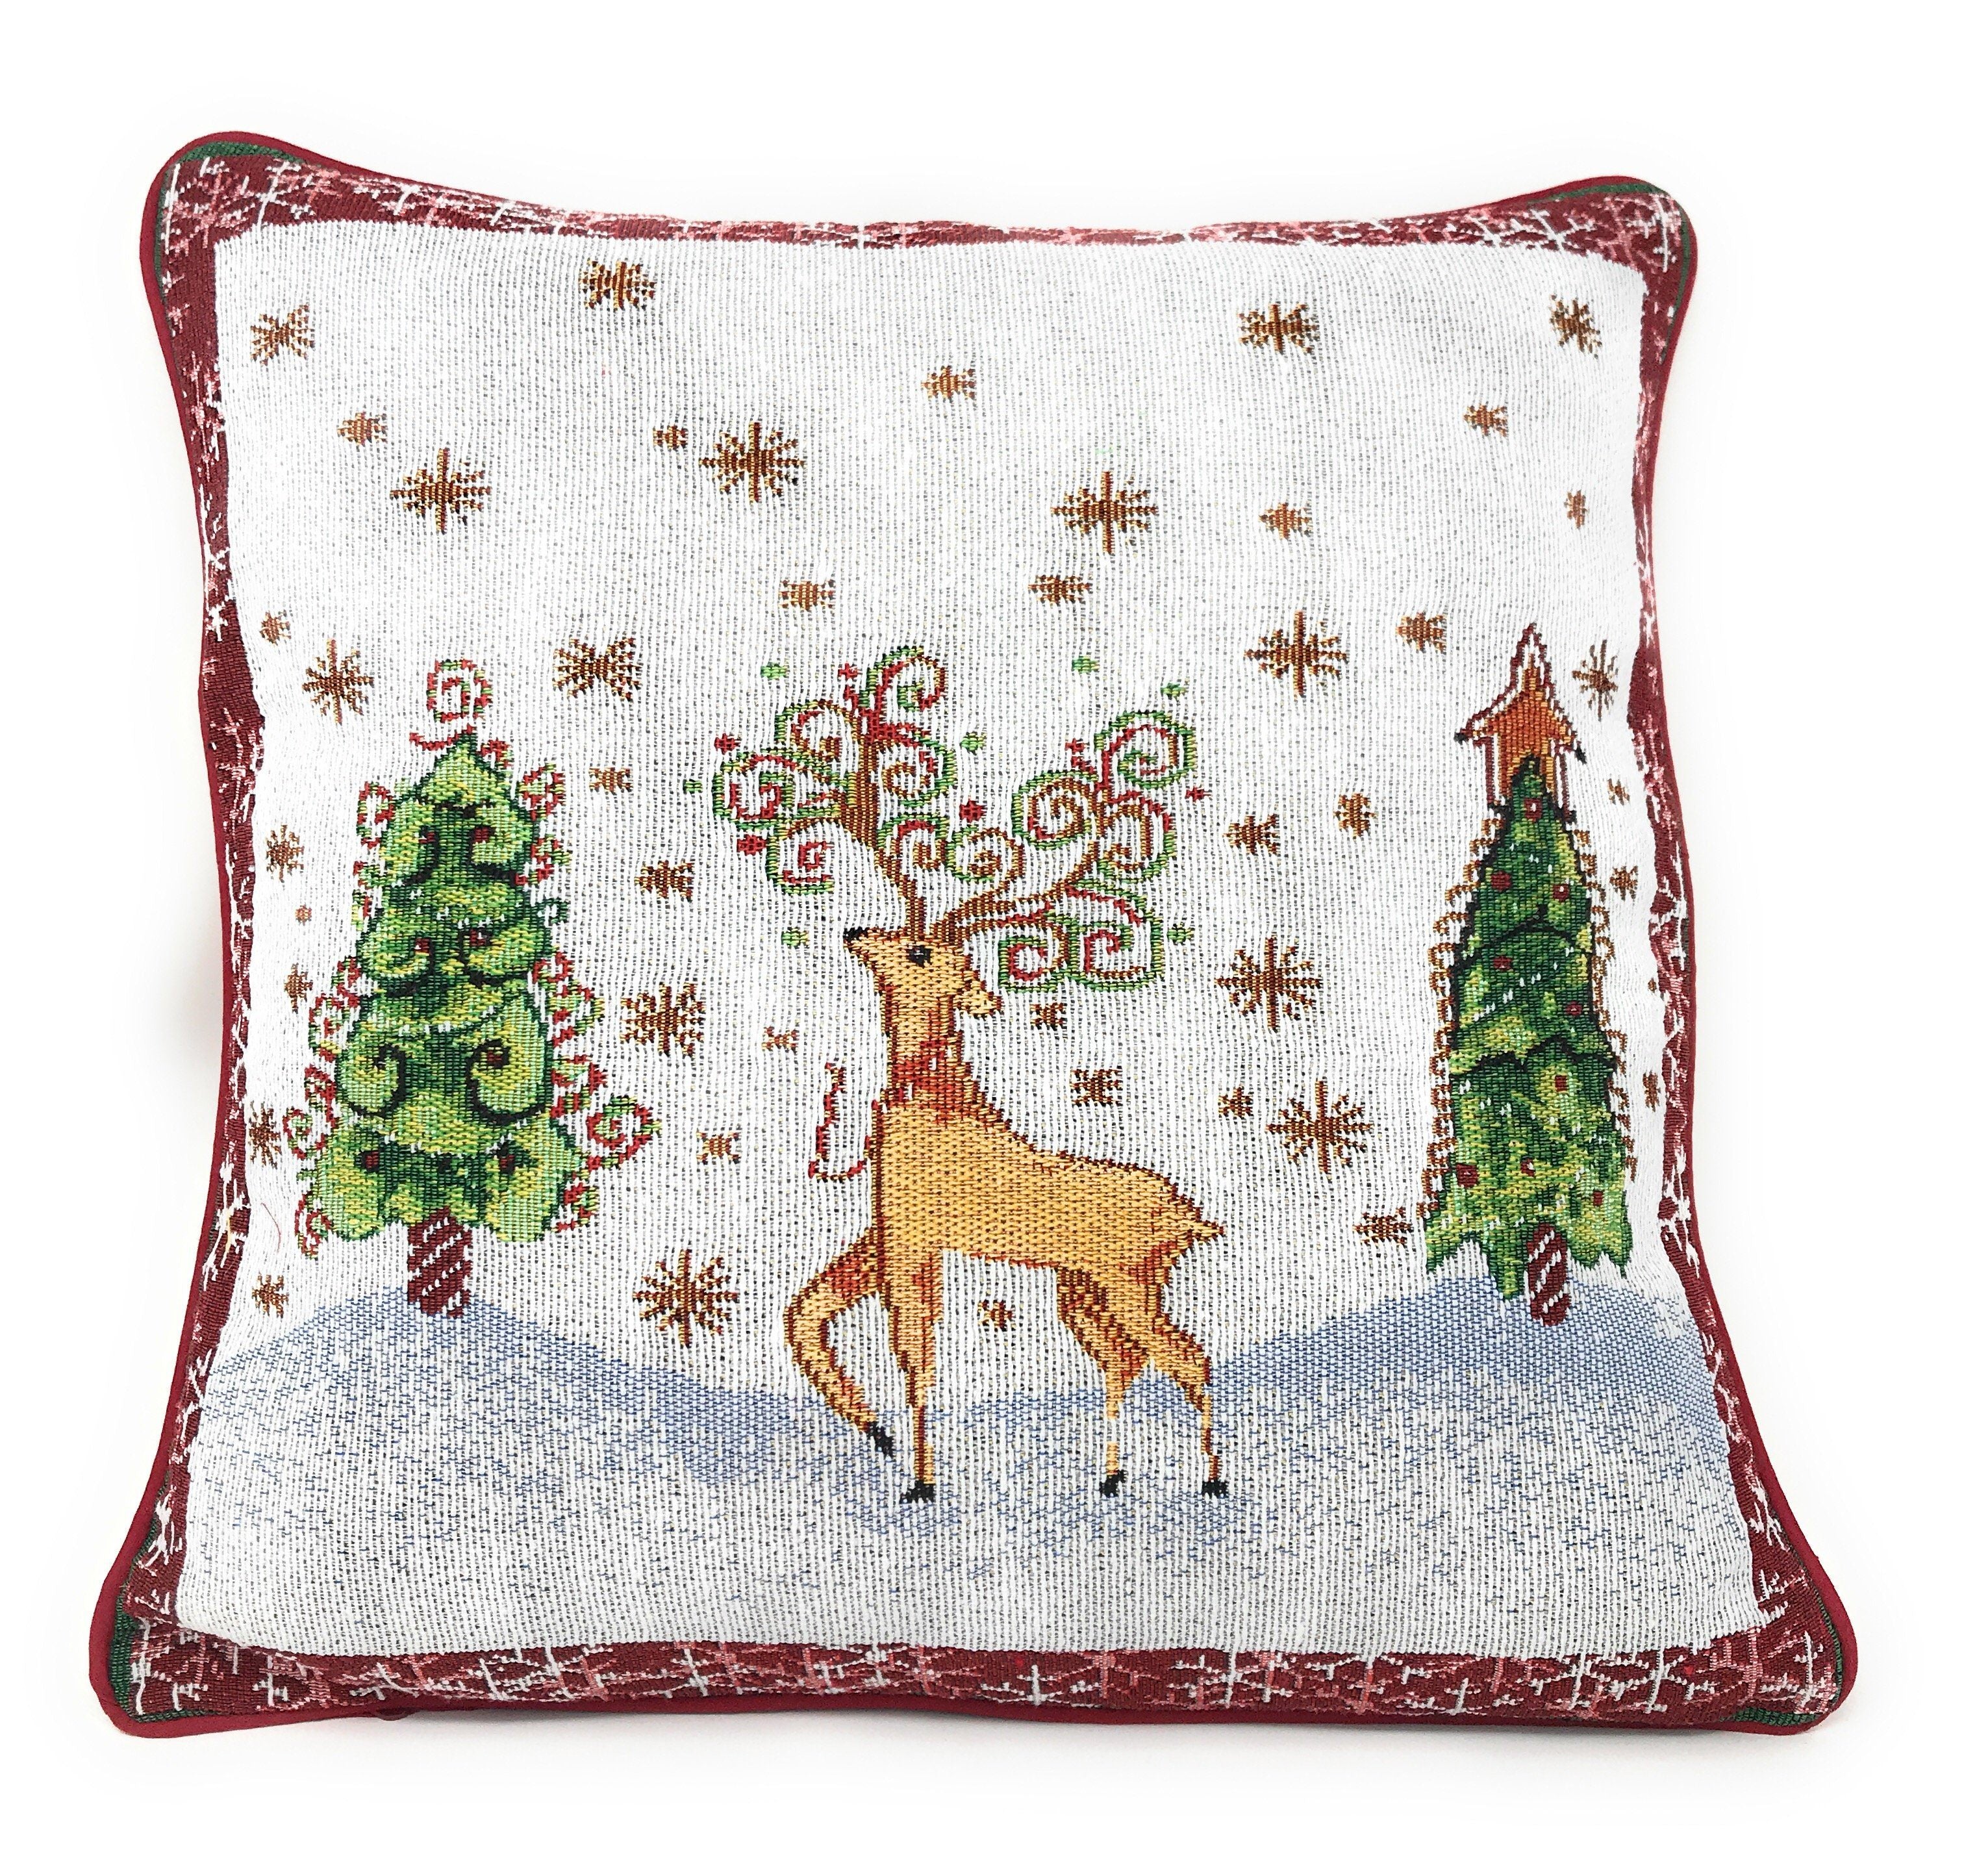 Tache Winter Forest Reindeer Vintage Holiday Woven Tapestry Cushion Cover (9192CC) - Tache Home Fashion